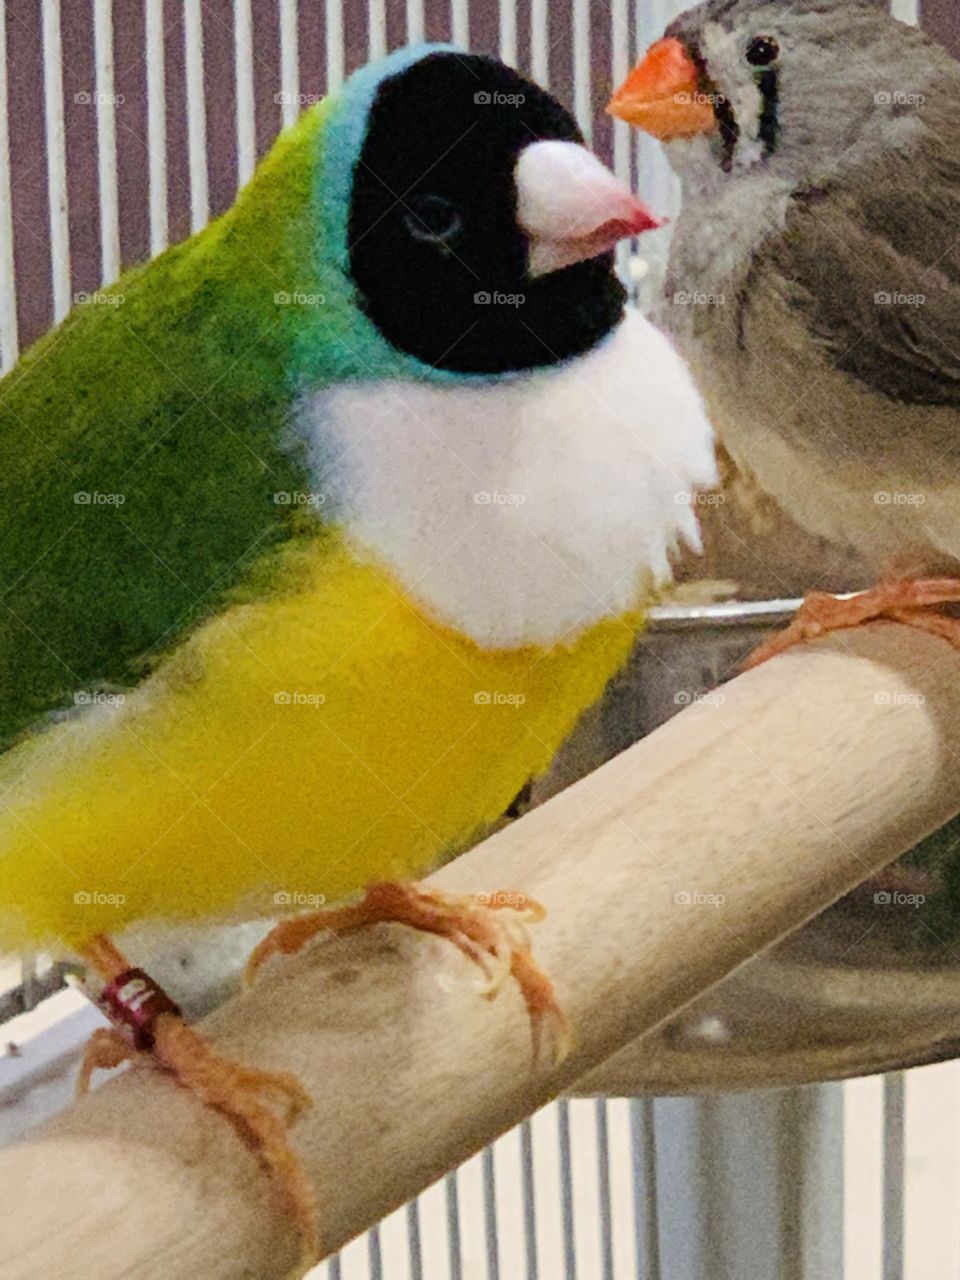 Birds at the pet store 